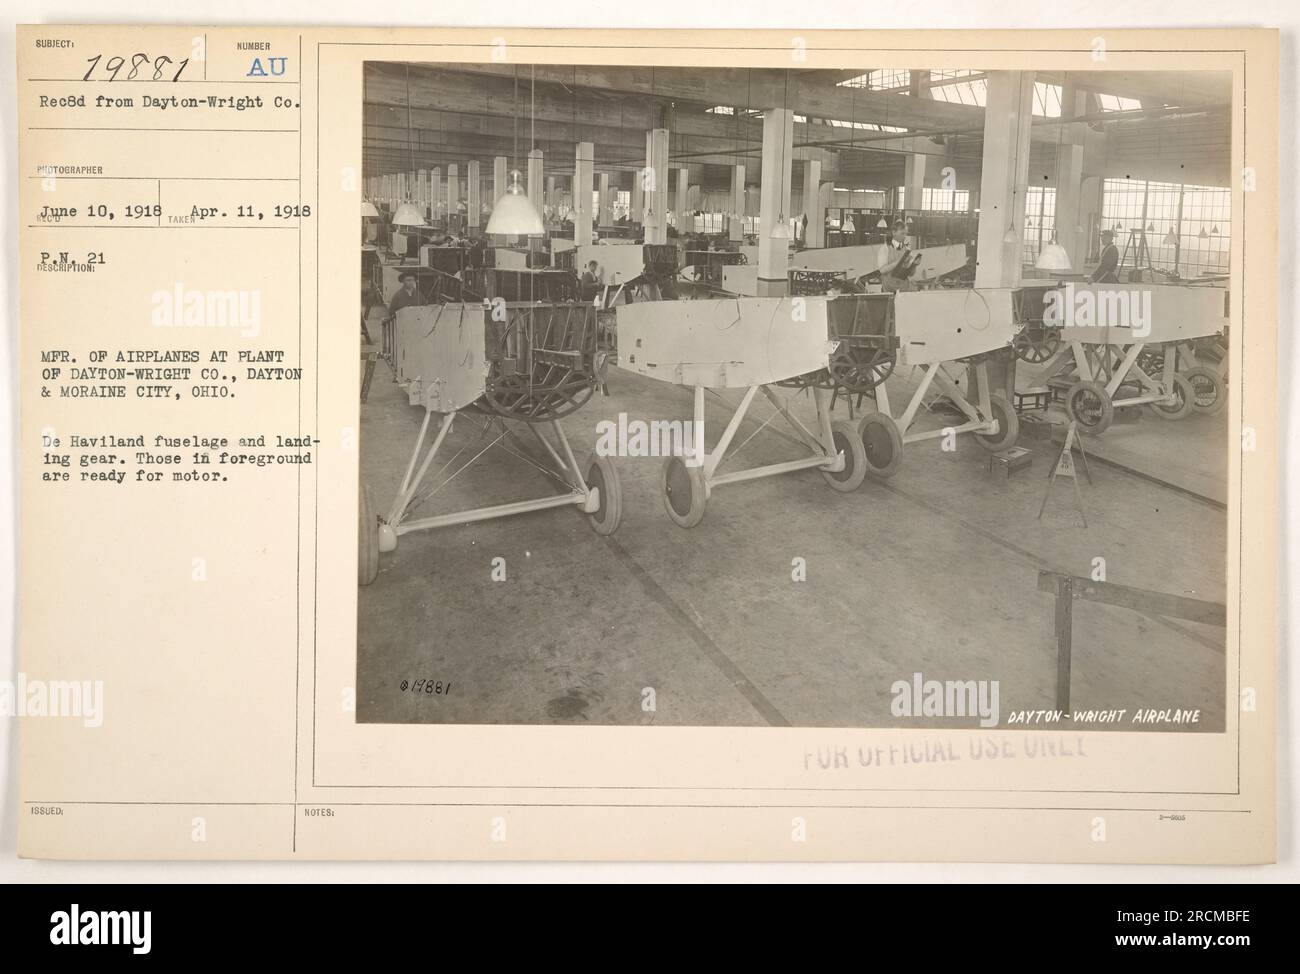 An image showing Dayton-Wright Co., a manufacturer of airplanes during World War One. The photo depicts De Haviland fuselages and landing gear, with those in the foreground being ready for motors. This is an official use photo for Dayton-Wright Airplane. Stock Photo